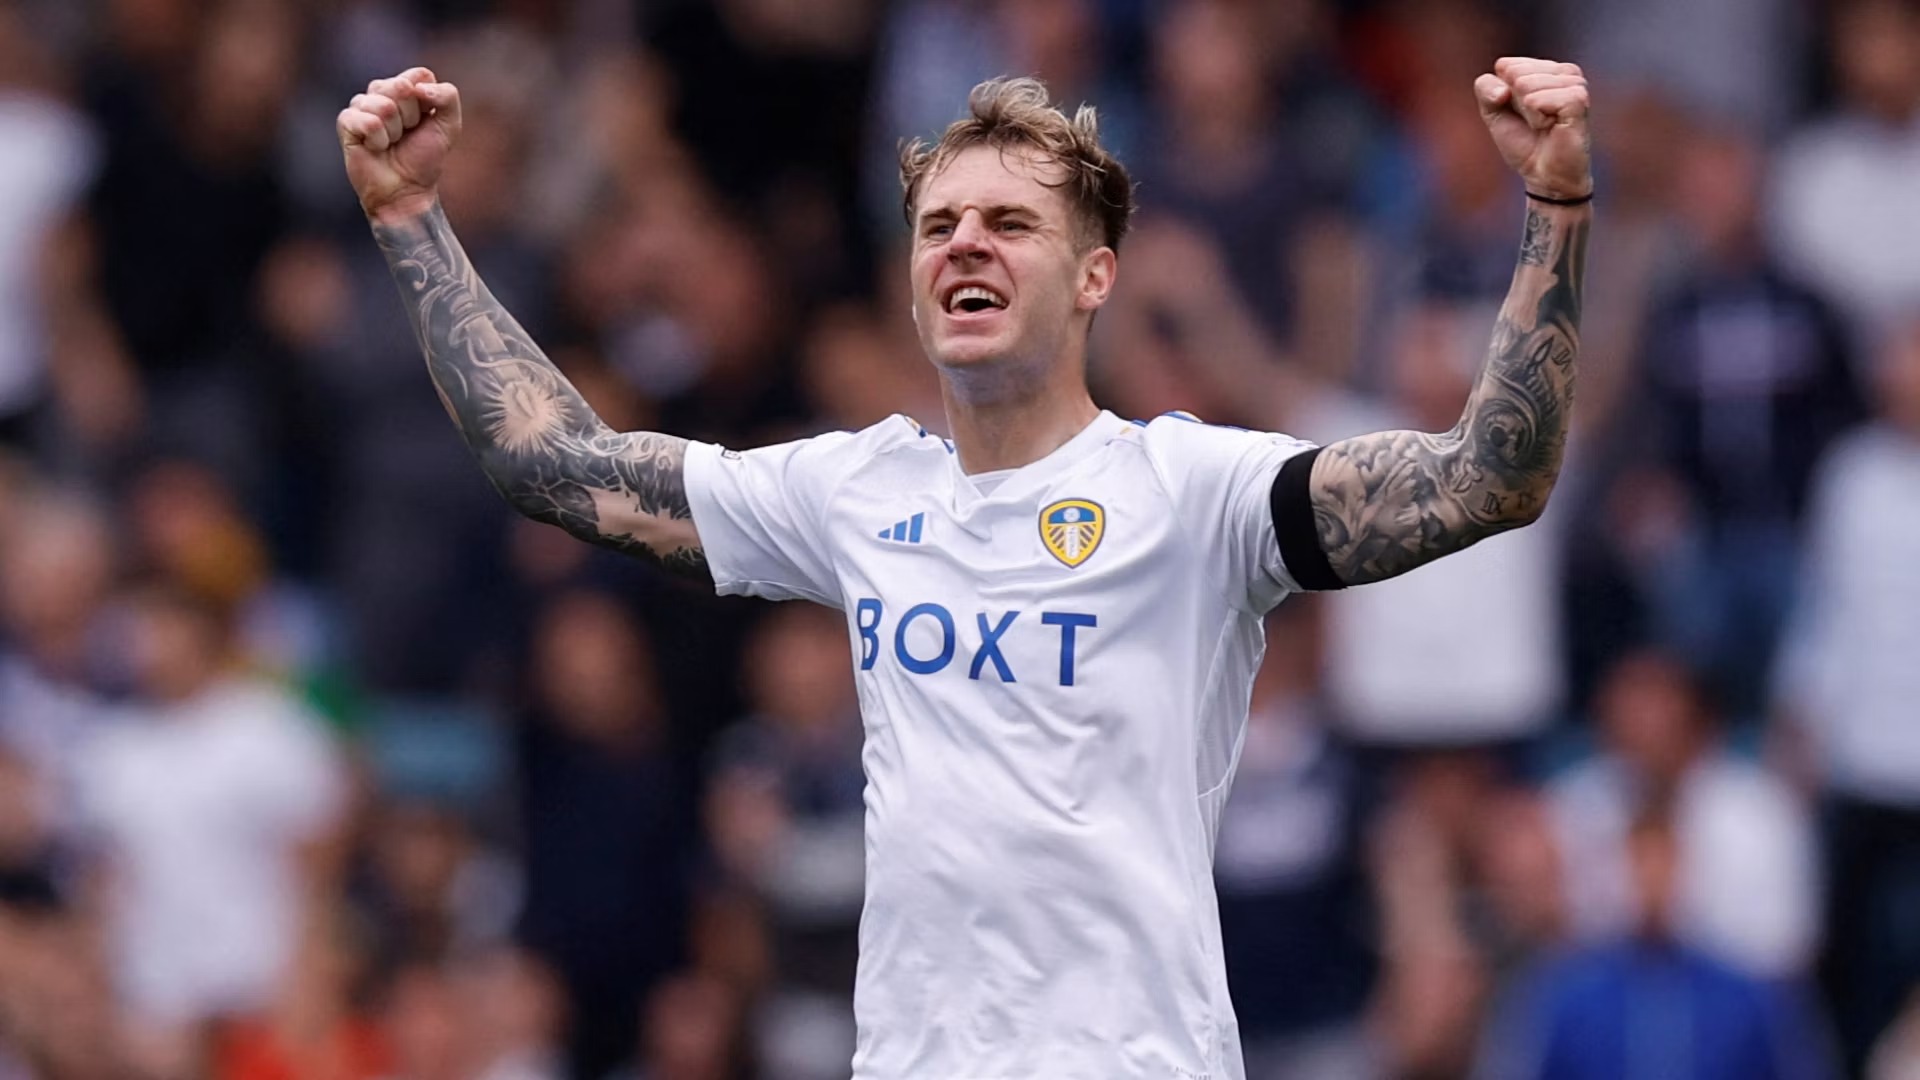 Breaking News: Ipswich Town Agree Personal Terms with Leeds United on Transfer Deal